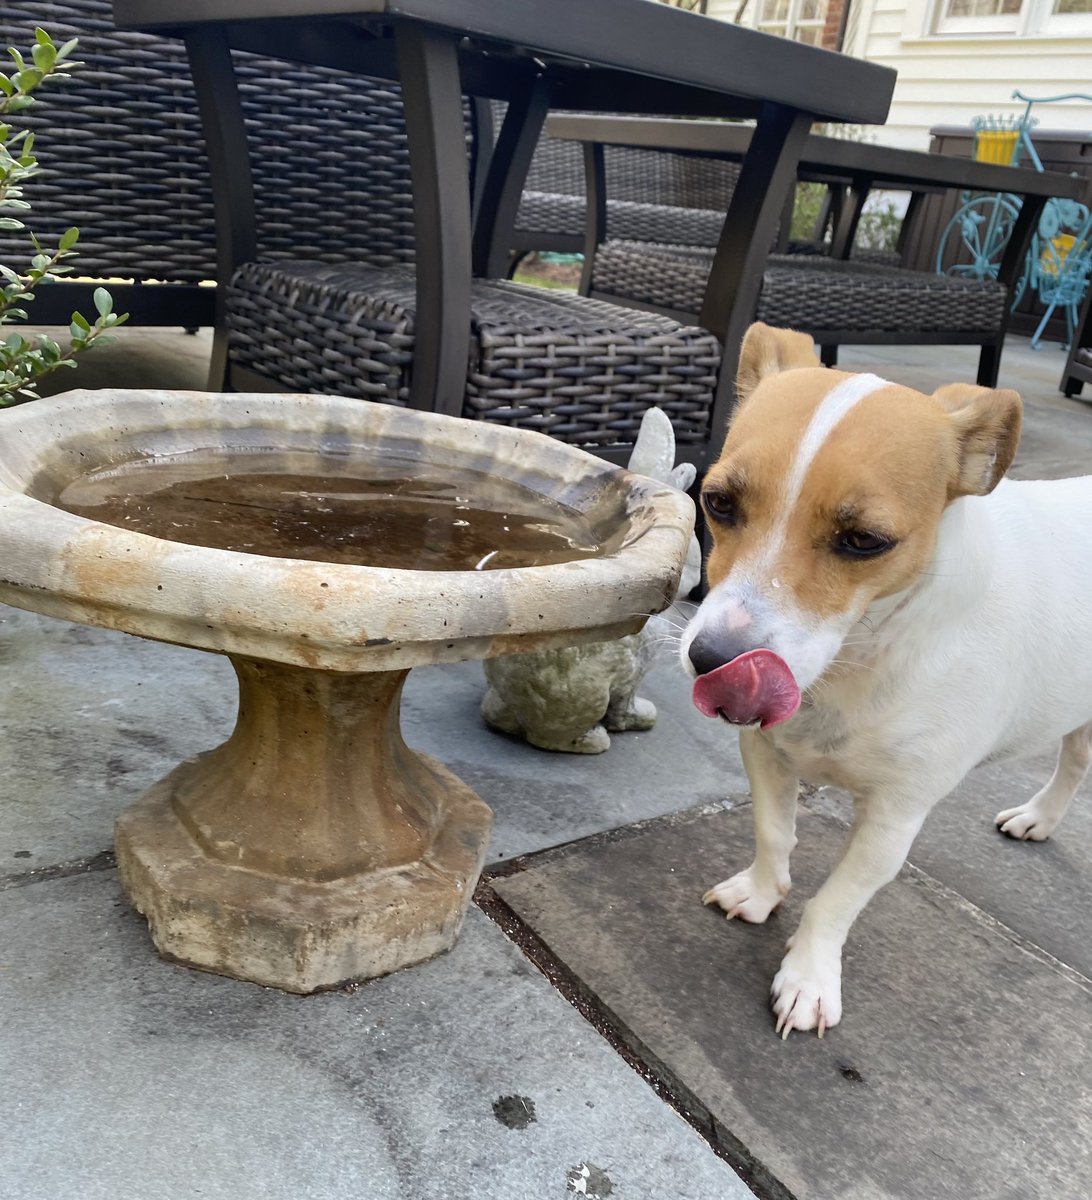 #TongueOutTuesday #dogs #tuesdayvibe #dogsofX 💚#zshq #dogsoftwitter 🩷 #BabyBea 😜🤪😛 💛 Who knew little birdbaths had such tasty water? Mom said it’s just rainwater - no birds! (Too bad 😂😂) 🐦‍⬛